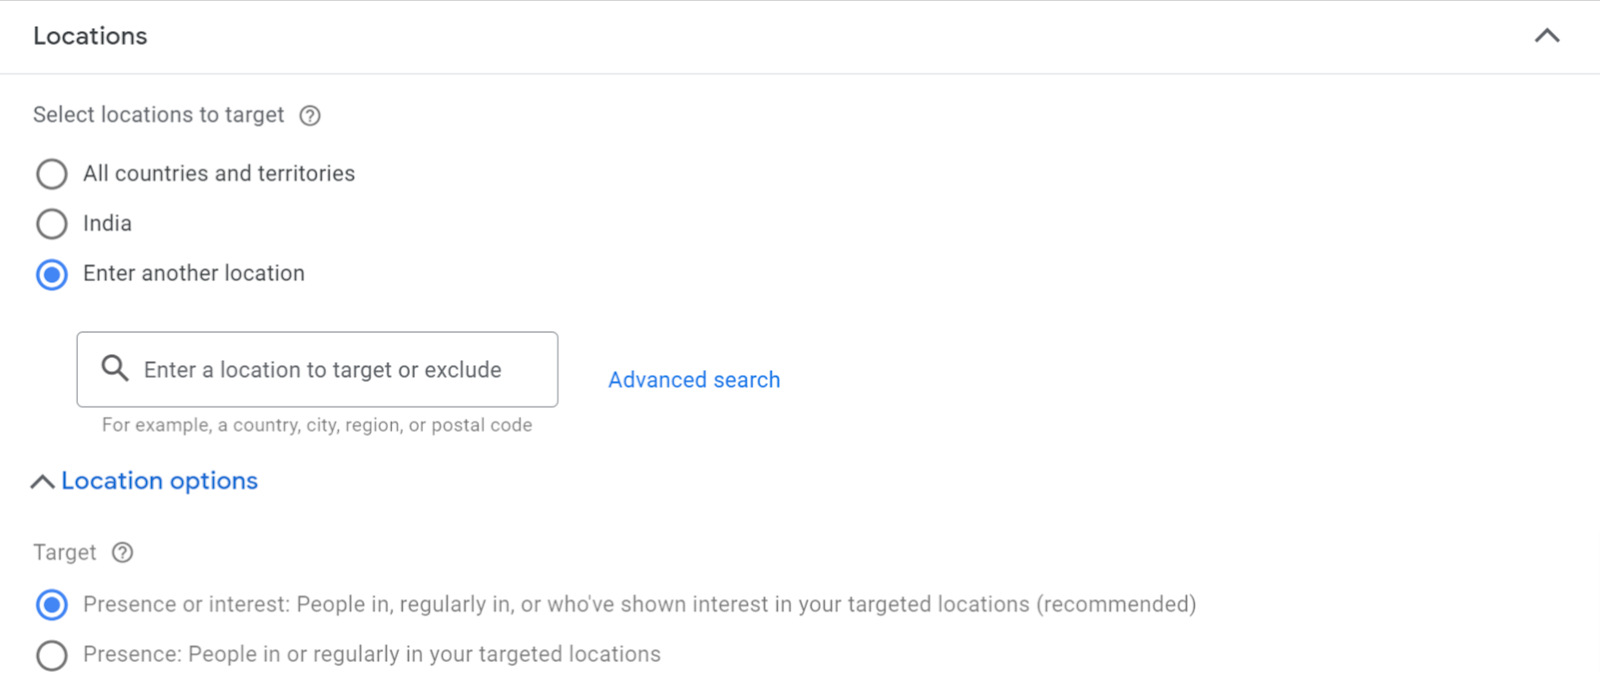 Google's location-targeting feature